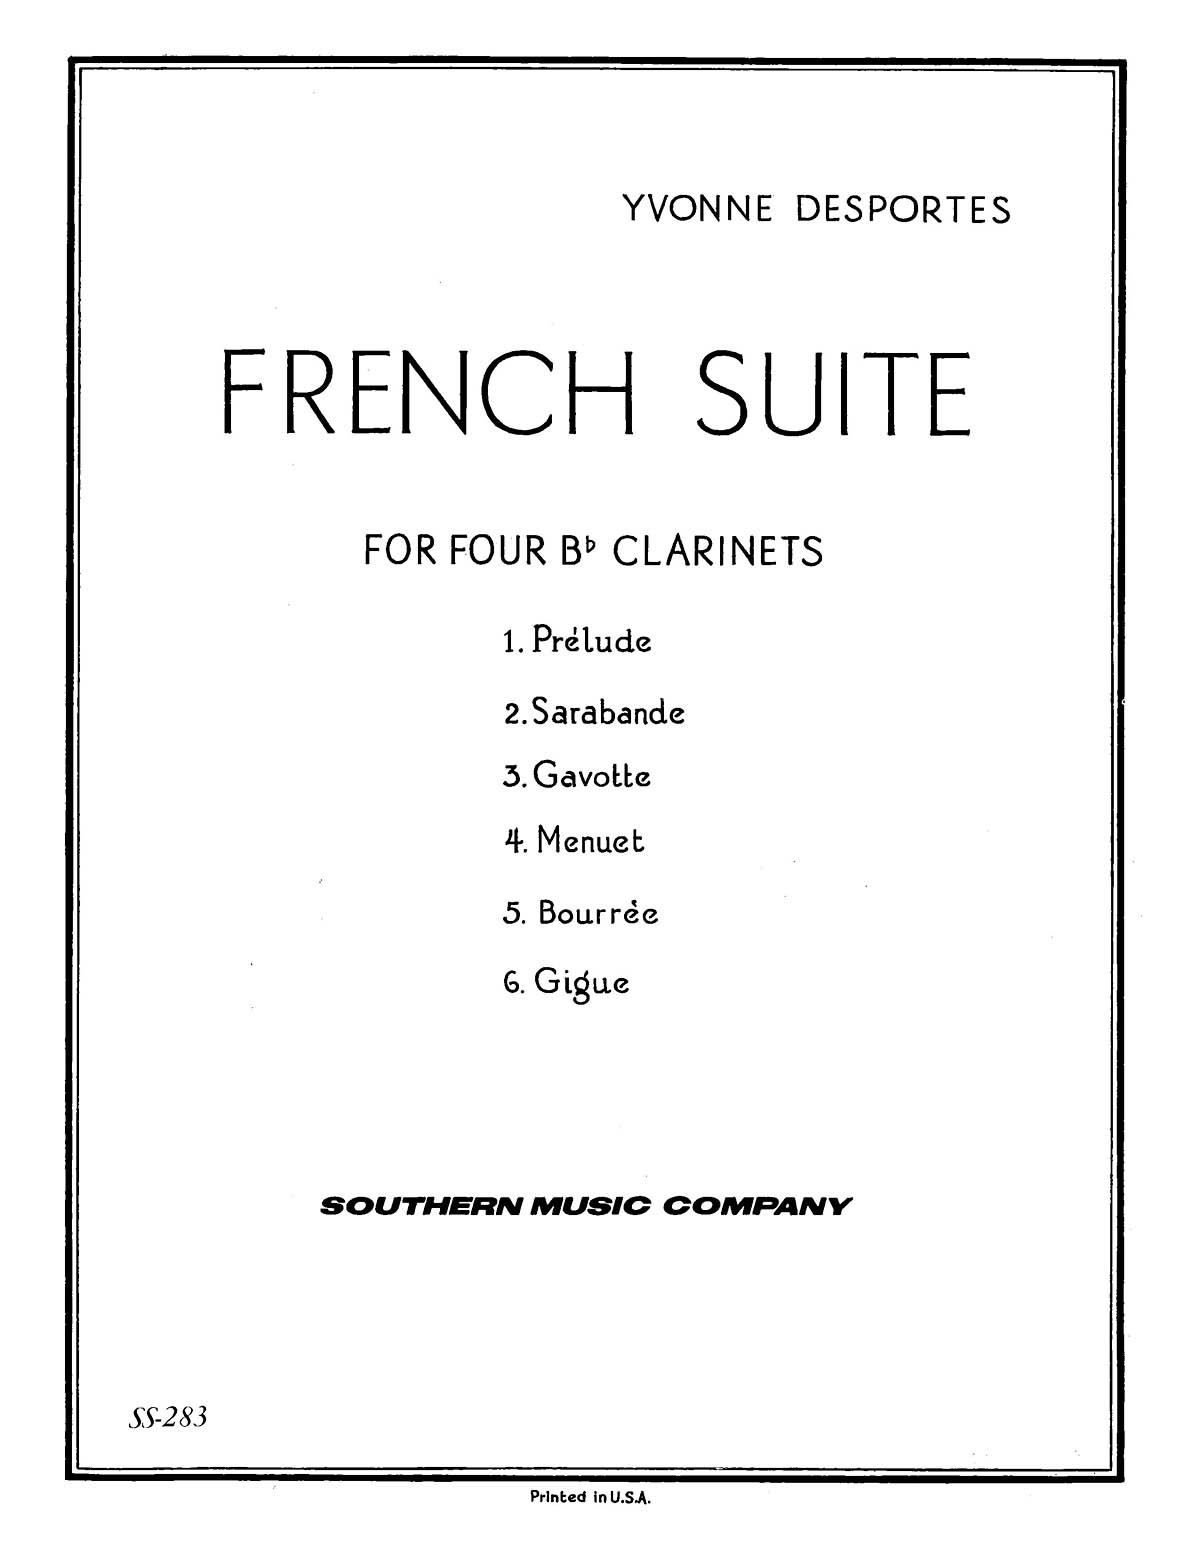 Yvonne Desportes: French Suite